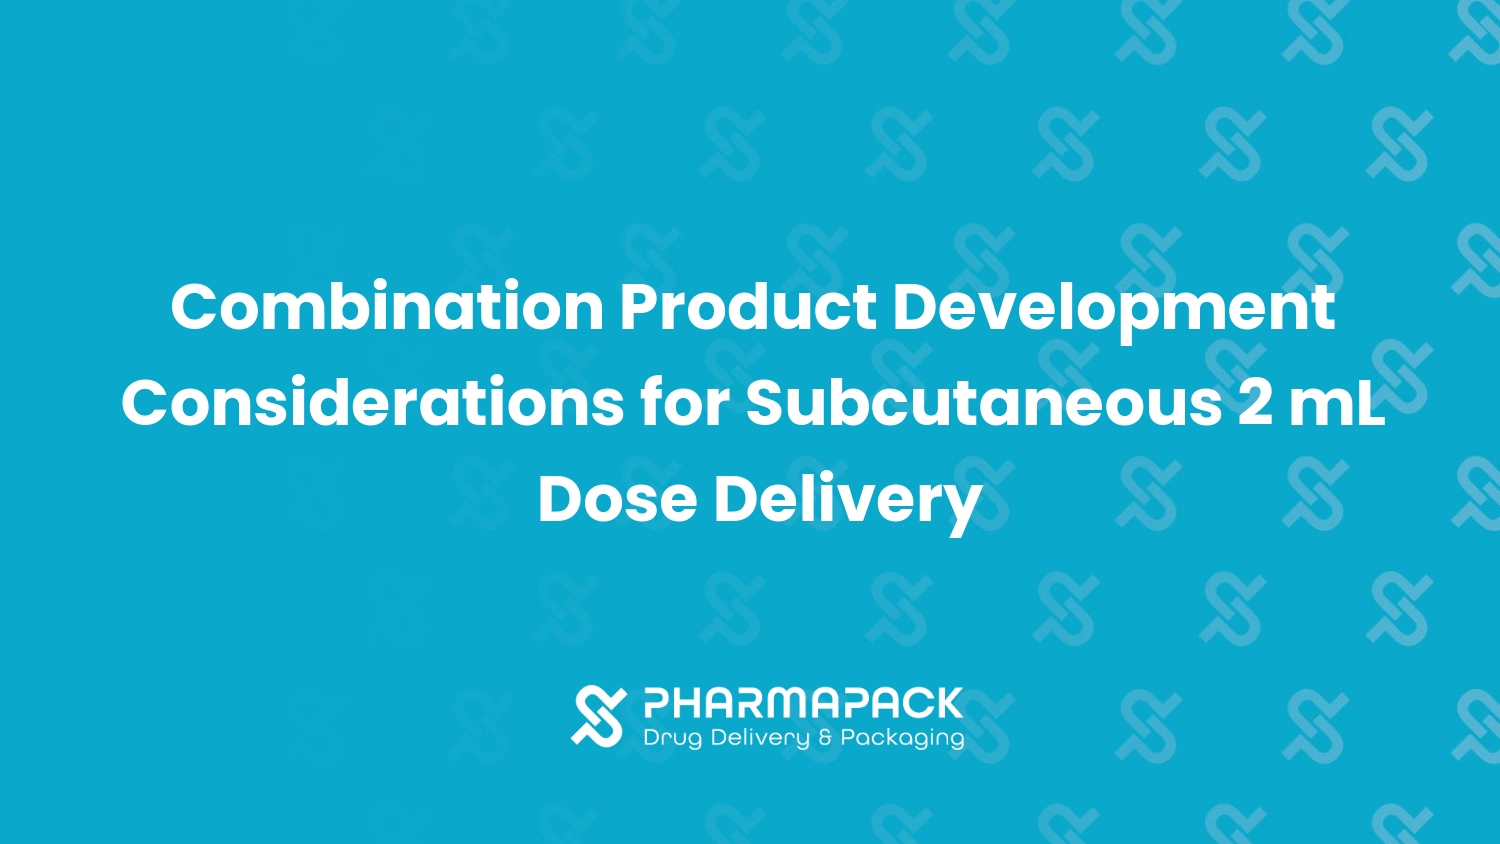 Combination Product Development Considerations for Subcutaneous 2 mL Dose Delivery